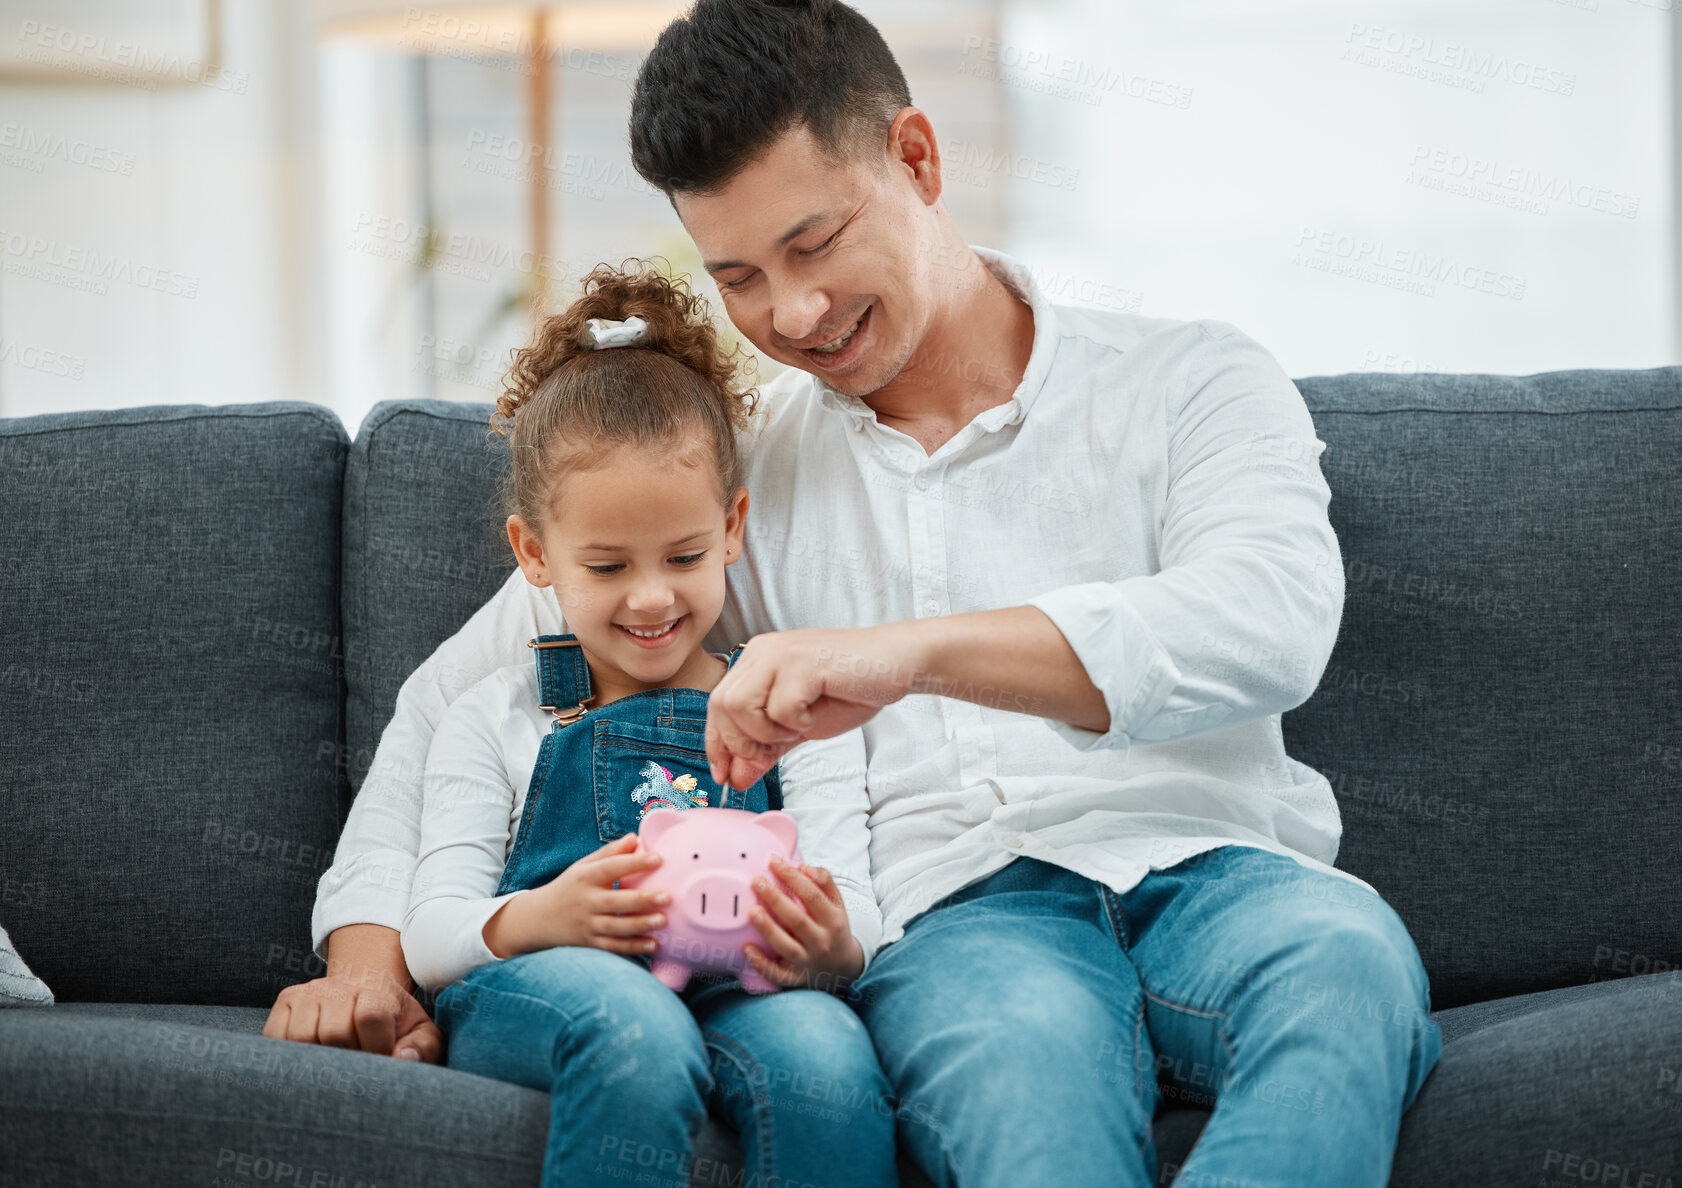 Buy stock photo Shot of a father teaching his daughter to save in a piggybank